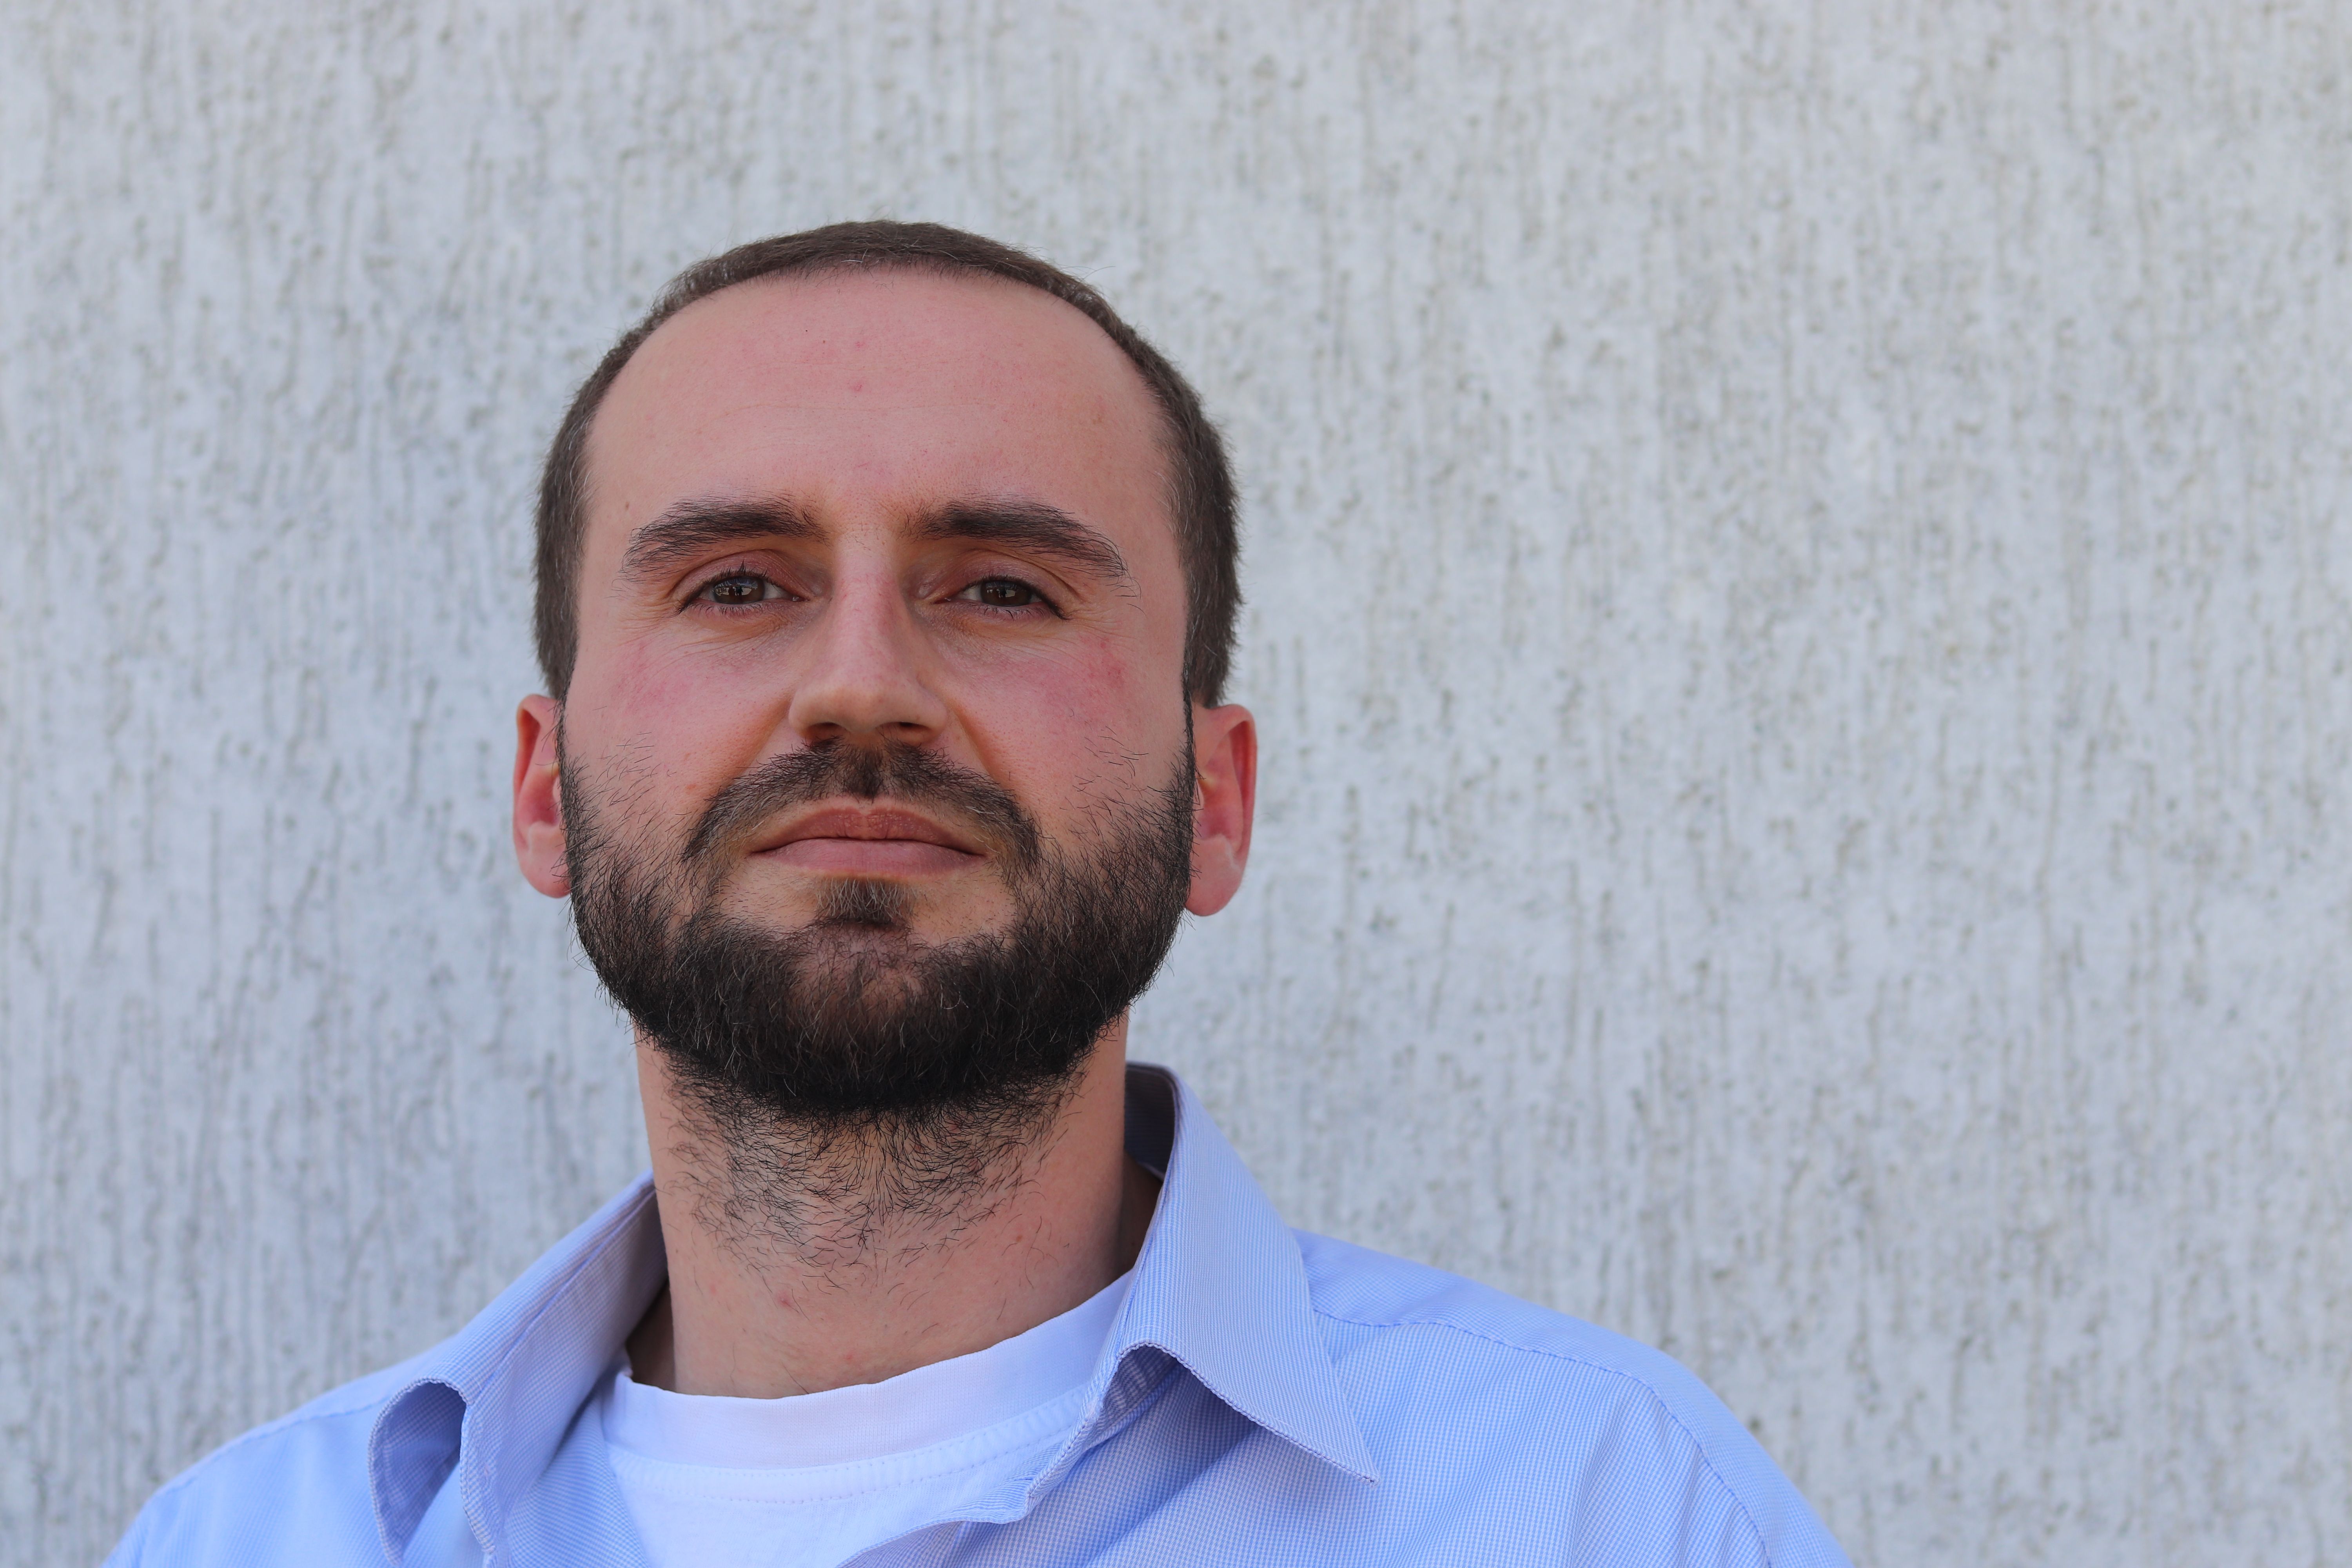 Albert Berisha, 31, traveled to Syria in October 2013 and returned to Kosovo in less than two weeks. In March 2018, Berisha was imprisoned for three years and six months at the Correctional Center in Smrekovnica. After appealing his sentence on charges for participation in a terrorist organization, Berisha founded the Institute for Security, Integration and Deradicalization (INSID), an NGO that worked directly with returnees and their families. “Nobody wanted to join ISIS in 2012 or 2013. Some of us didn’t even know these morons existed. We/they wanted to join the opposition. But they wanted to be in one Albanian speaking group,” he said. “And ISIS was mostly near the border with Turkey.” Image by AJ Naddaff. Kosovo, 2018.